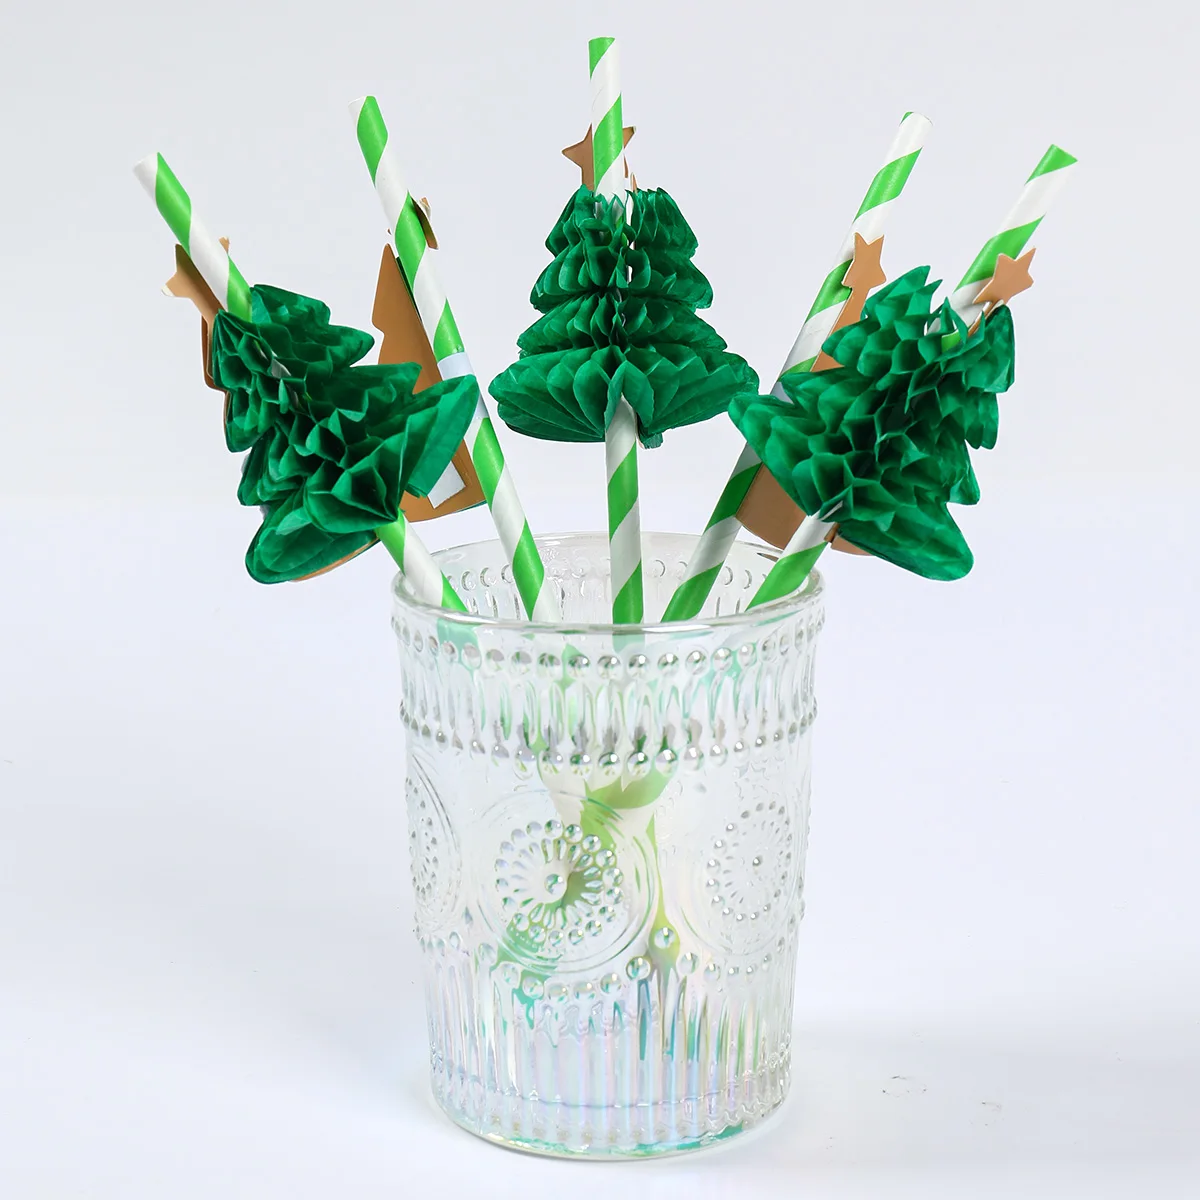 https://ae01.alicdn.com/kf/Sc0b289ee749a40fe892ce4e40e0986d4r/Christmas-Tree-Paper-Straw-Merry-Christmas-Party-Decoration-for-Home-2023-Navidad-Natal-Noel-Xmas-Gifts.jpg